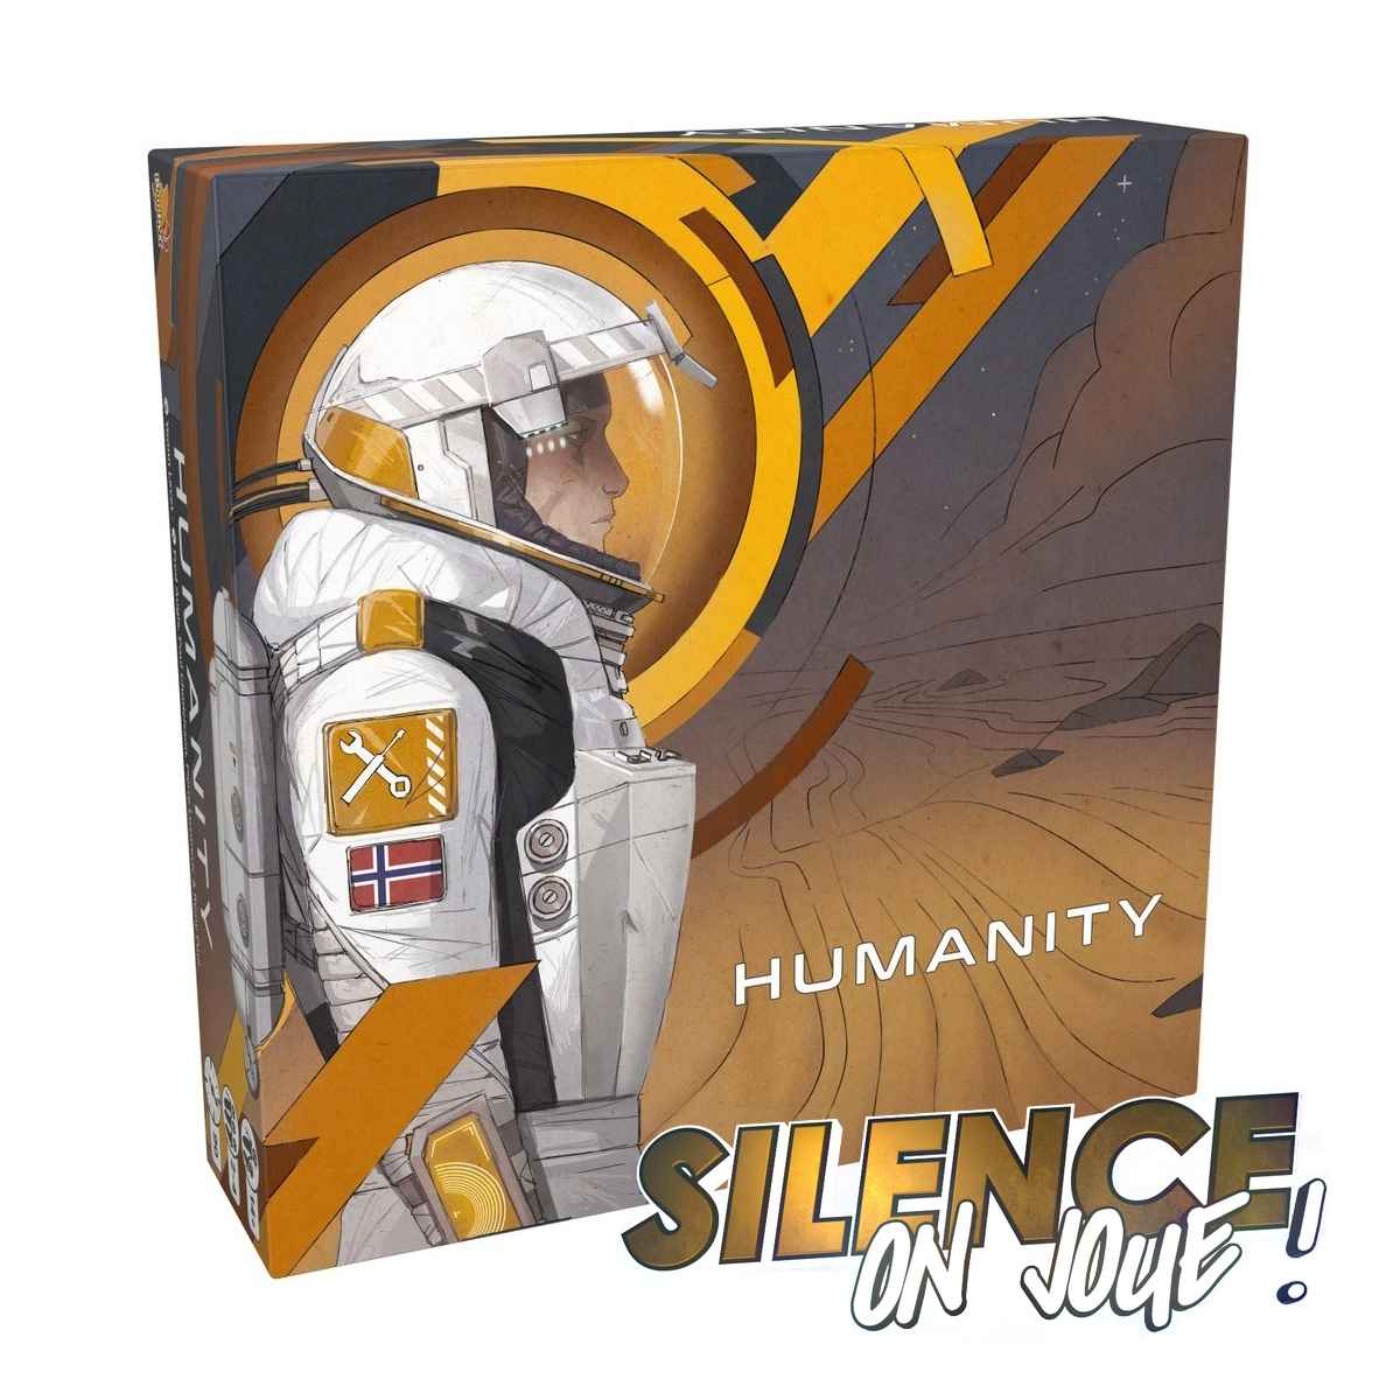 cover art for #188 - Humanity - #Expert #Espace